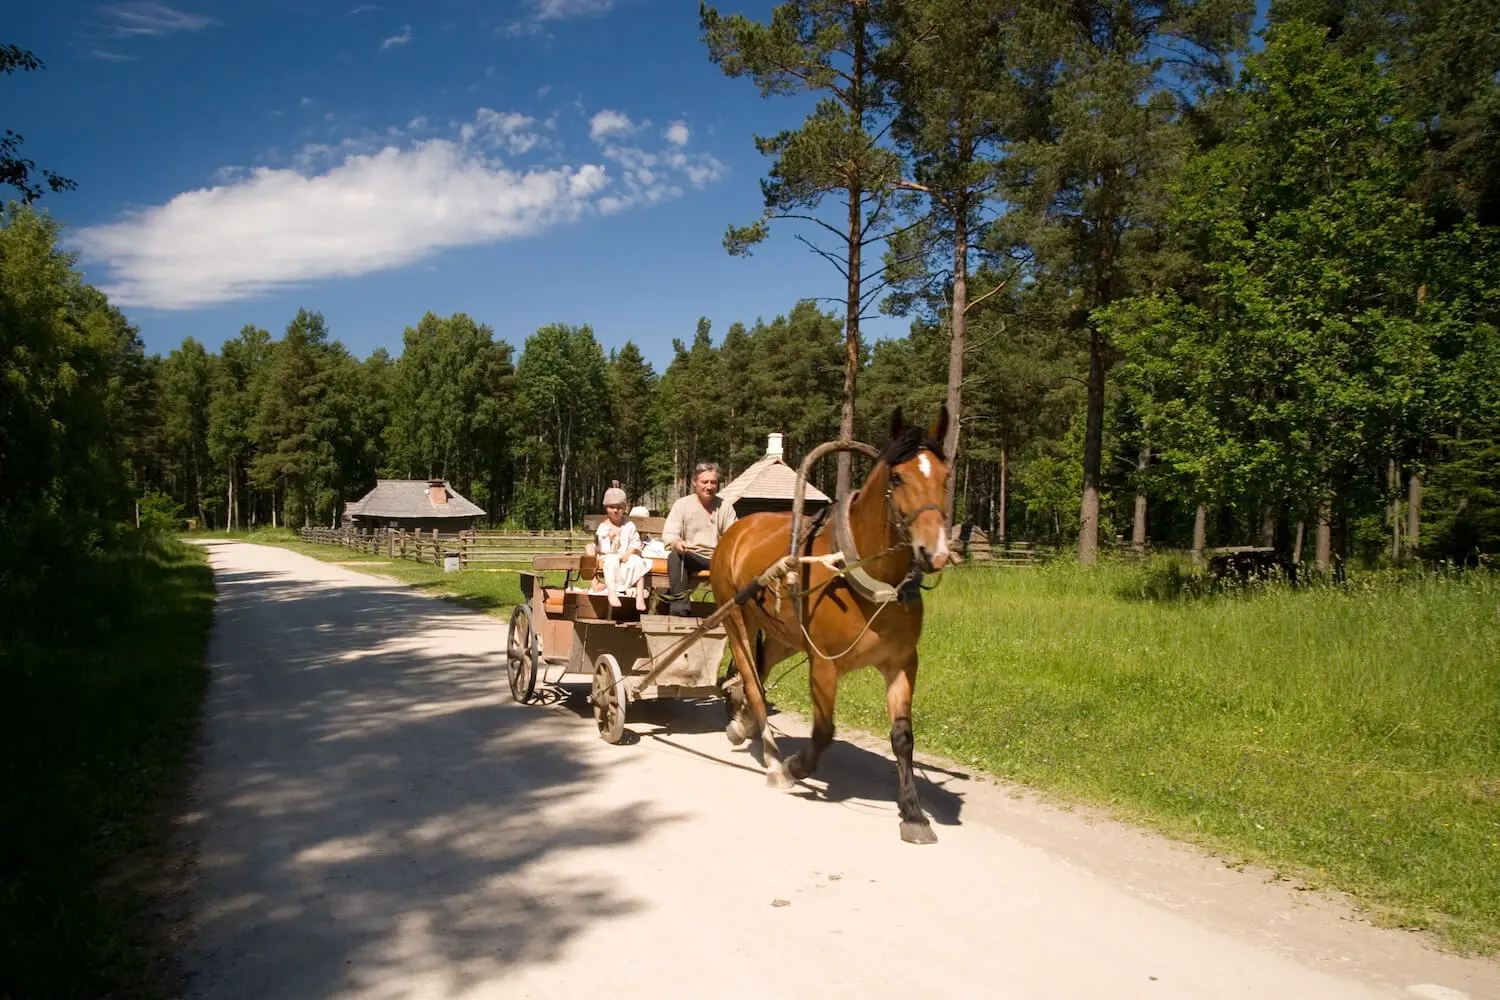 Estonian Open Air Museum - tickets, hours, prices